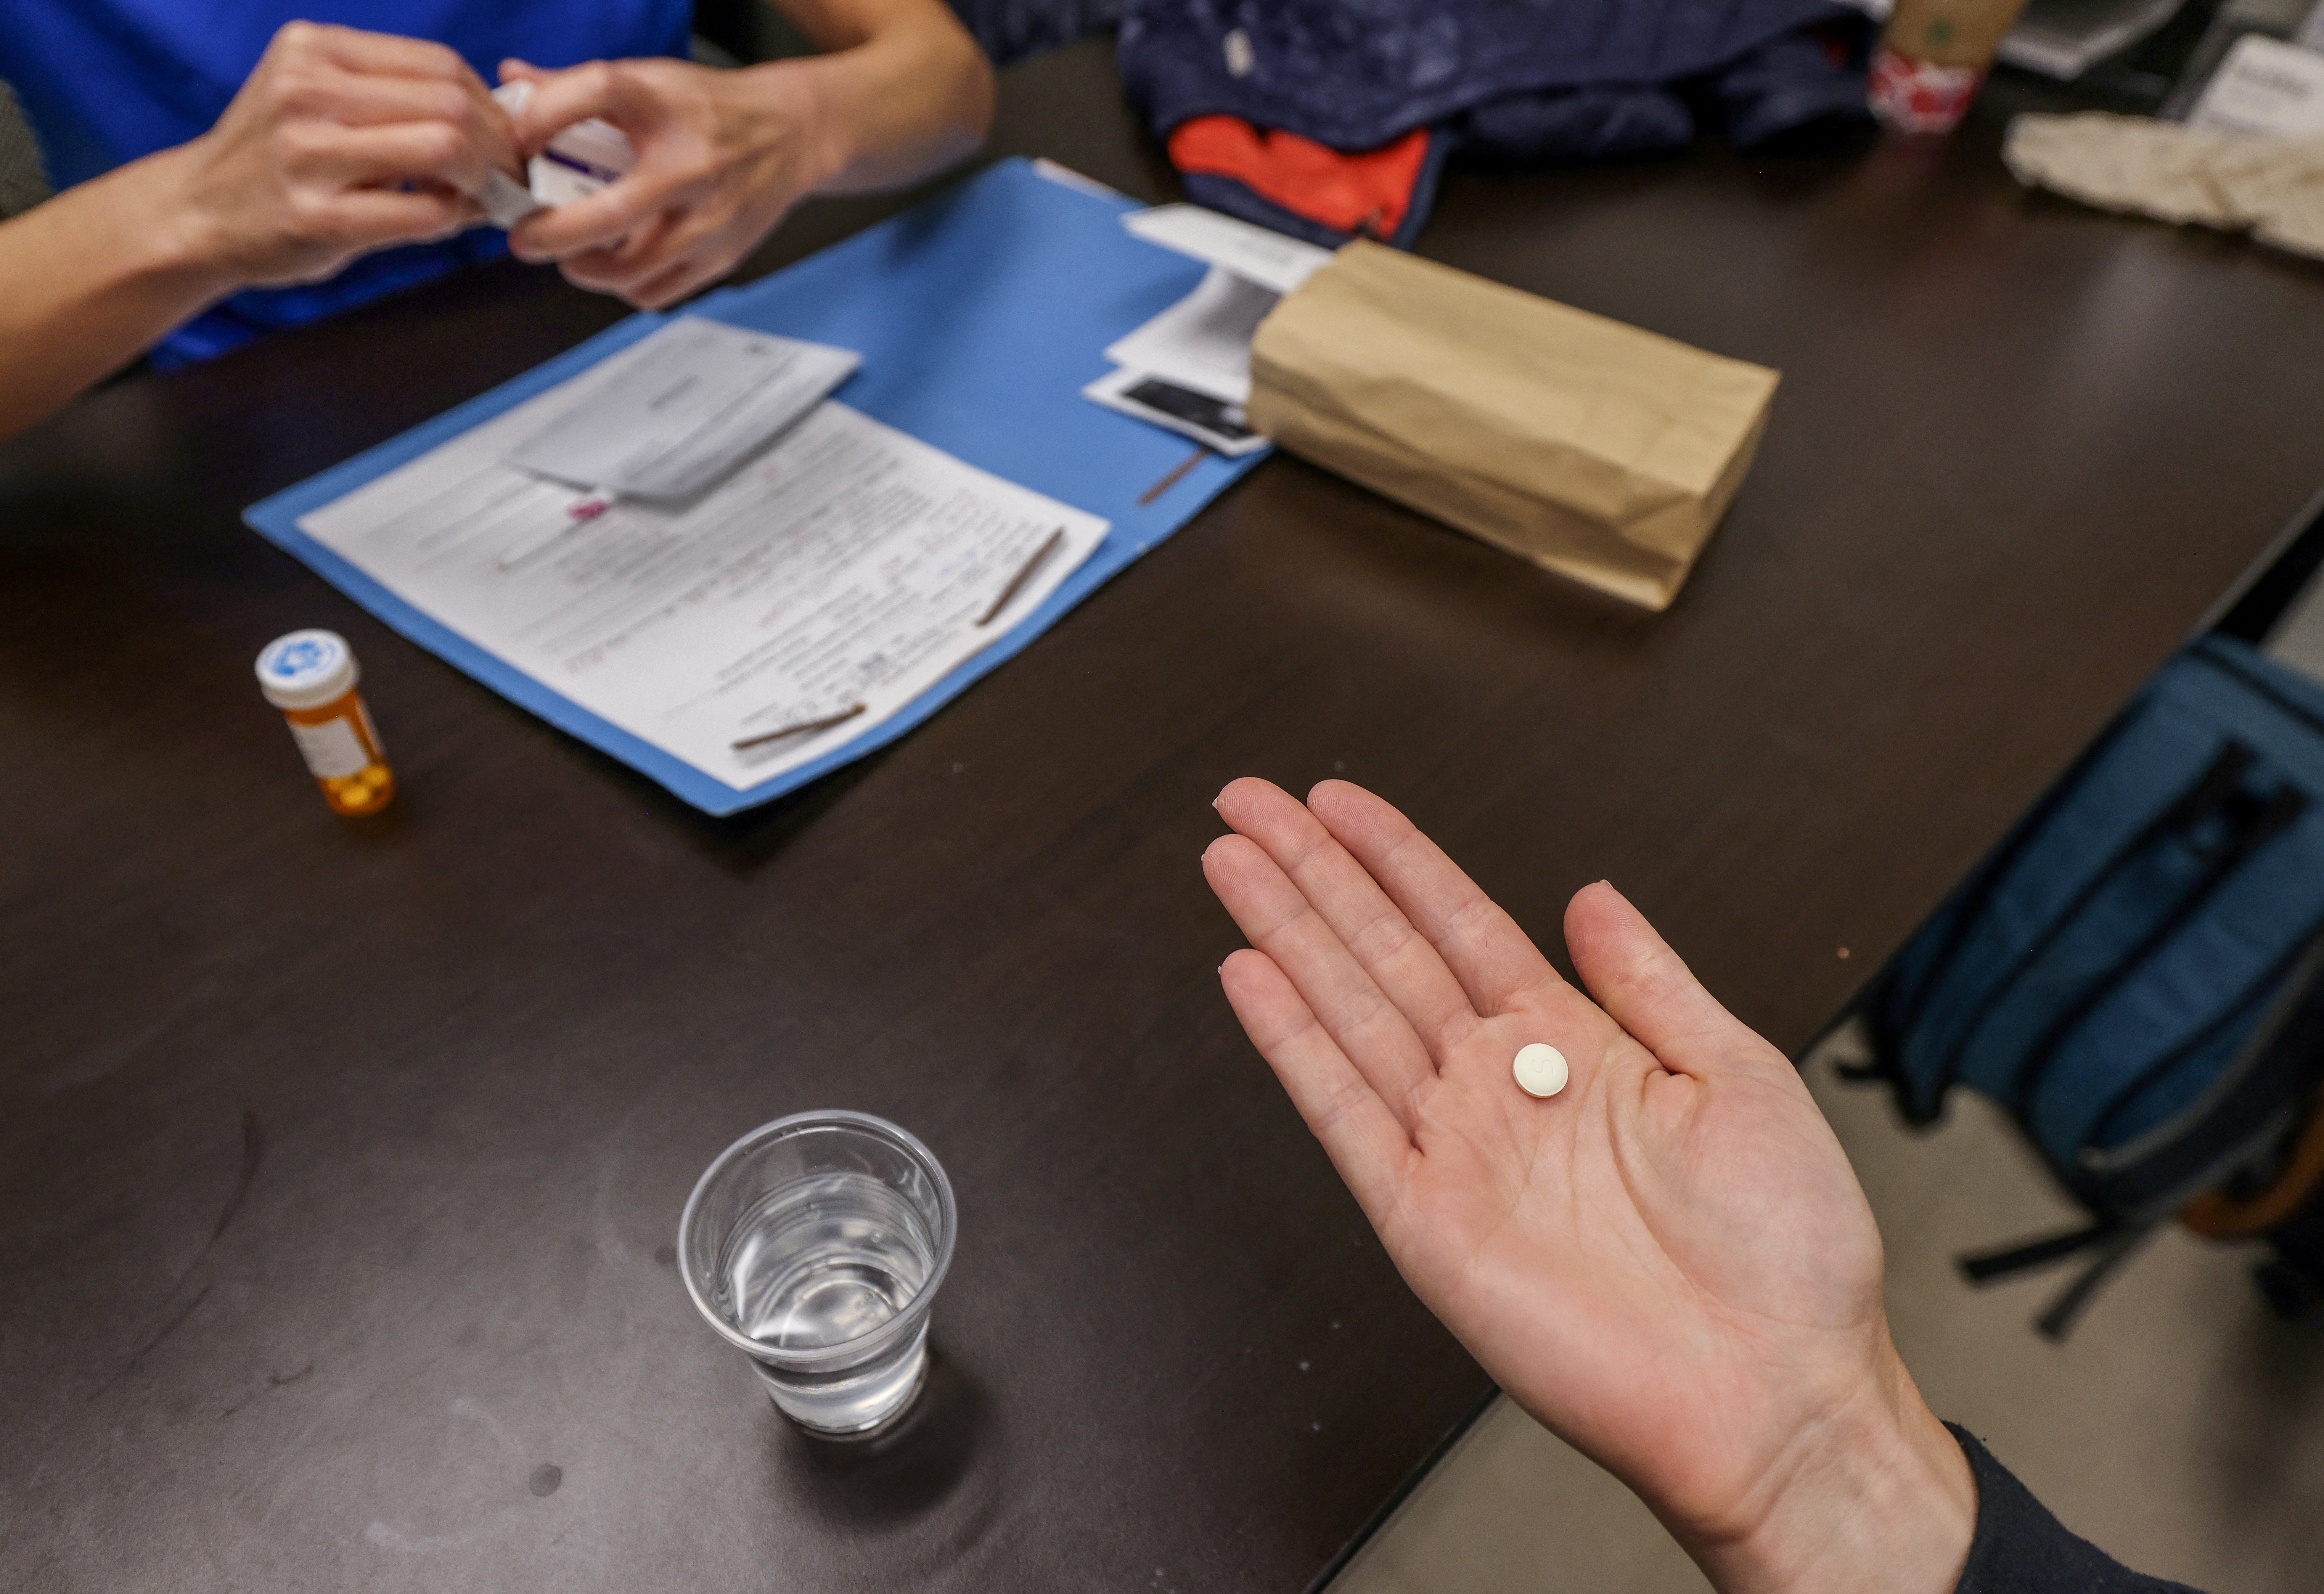 Dr Shelly Tien hands a patient abortion medication at the Trust Women Foundation clinic in Oklahoma City in December 2021.